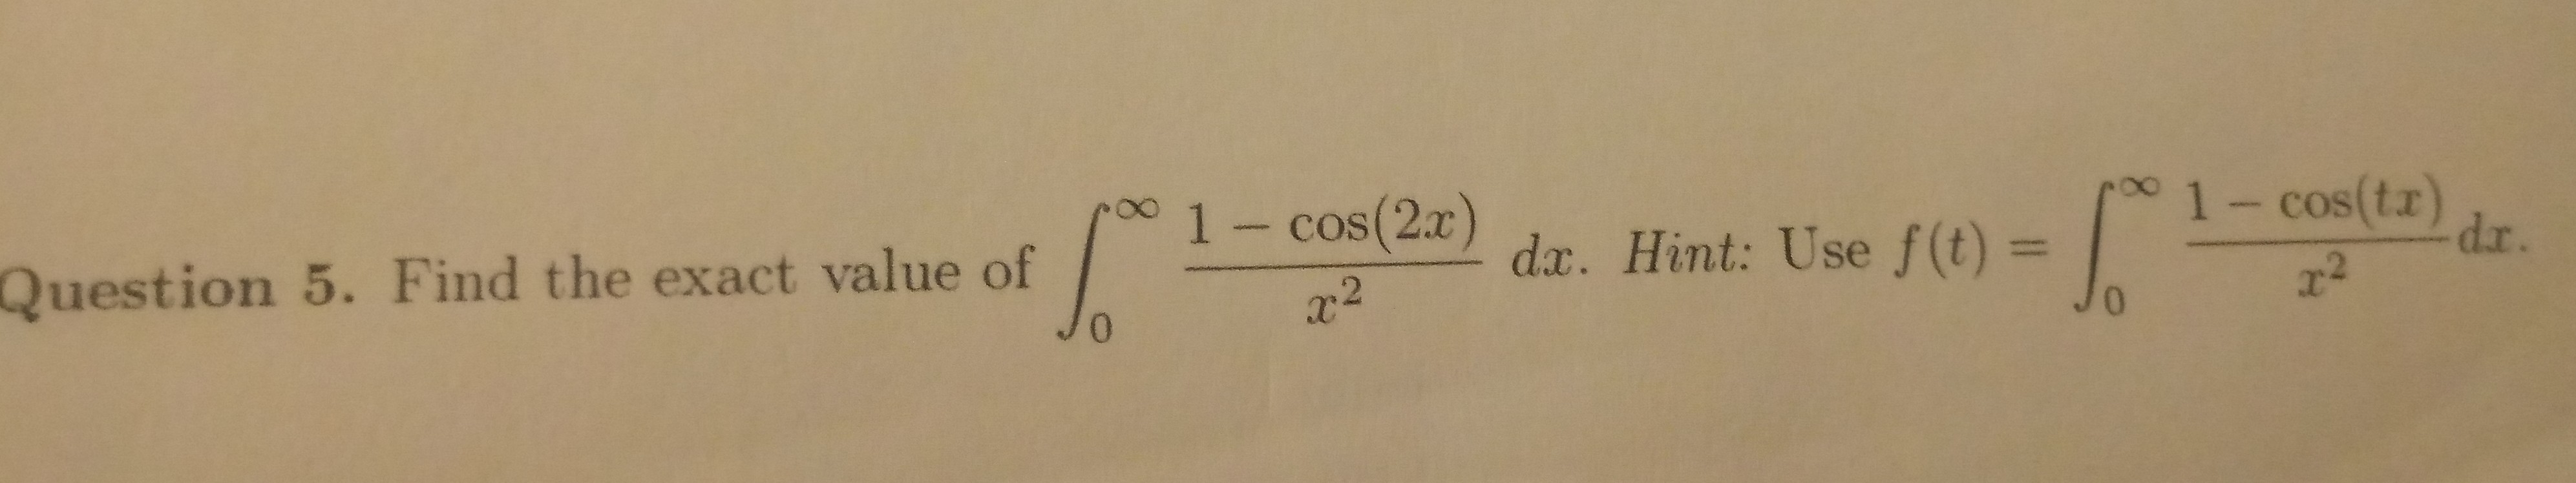 1- cos(2x
da. Hint: Use f(t) =
1- cos(tr)
dr.
wwwww.
Question 5. Find the exact value of
x2
